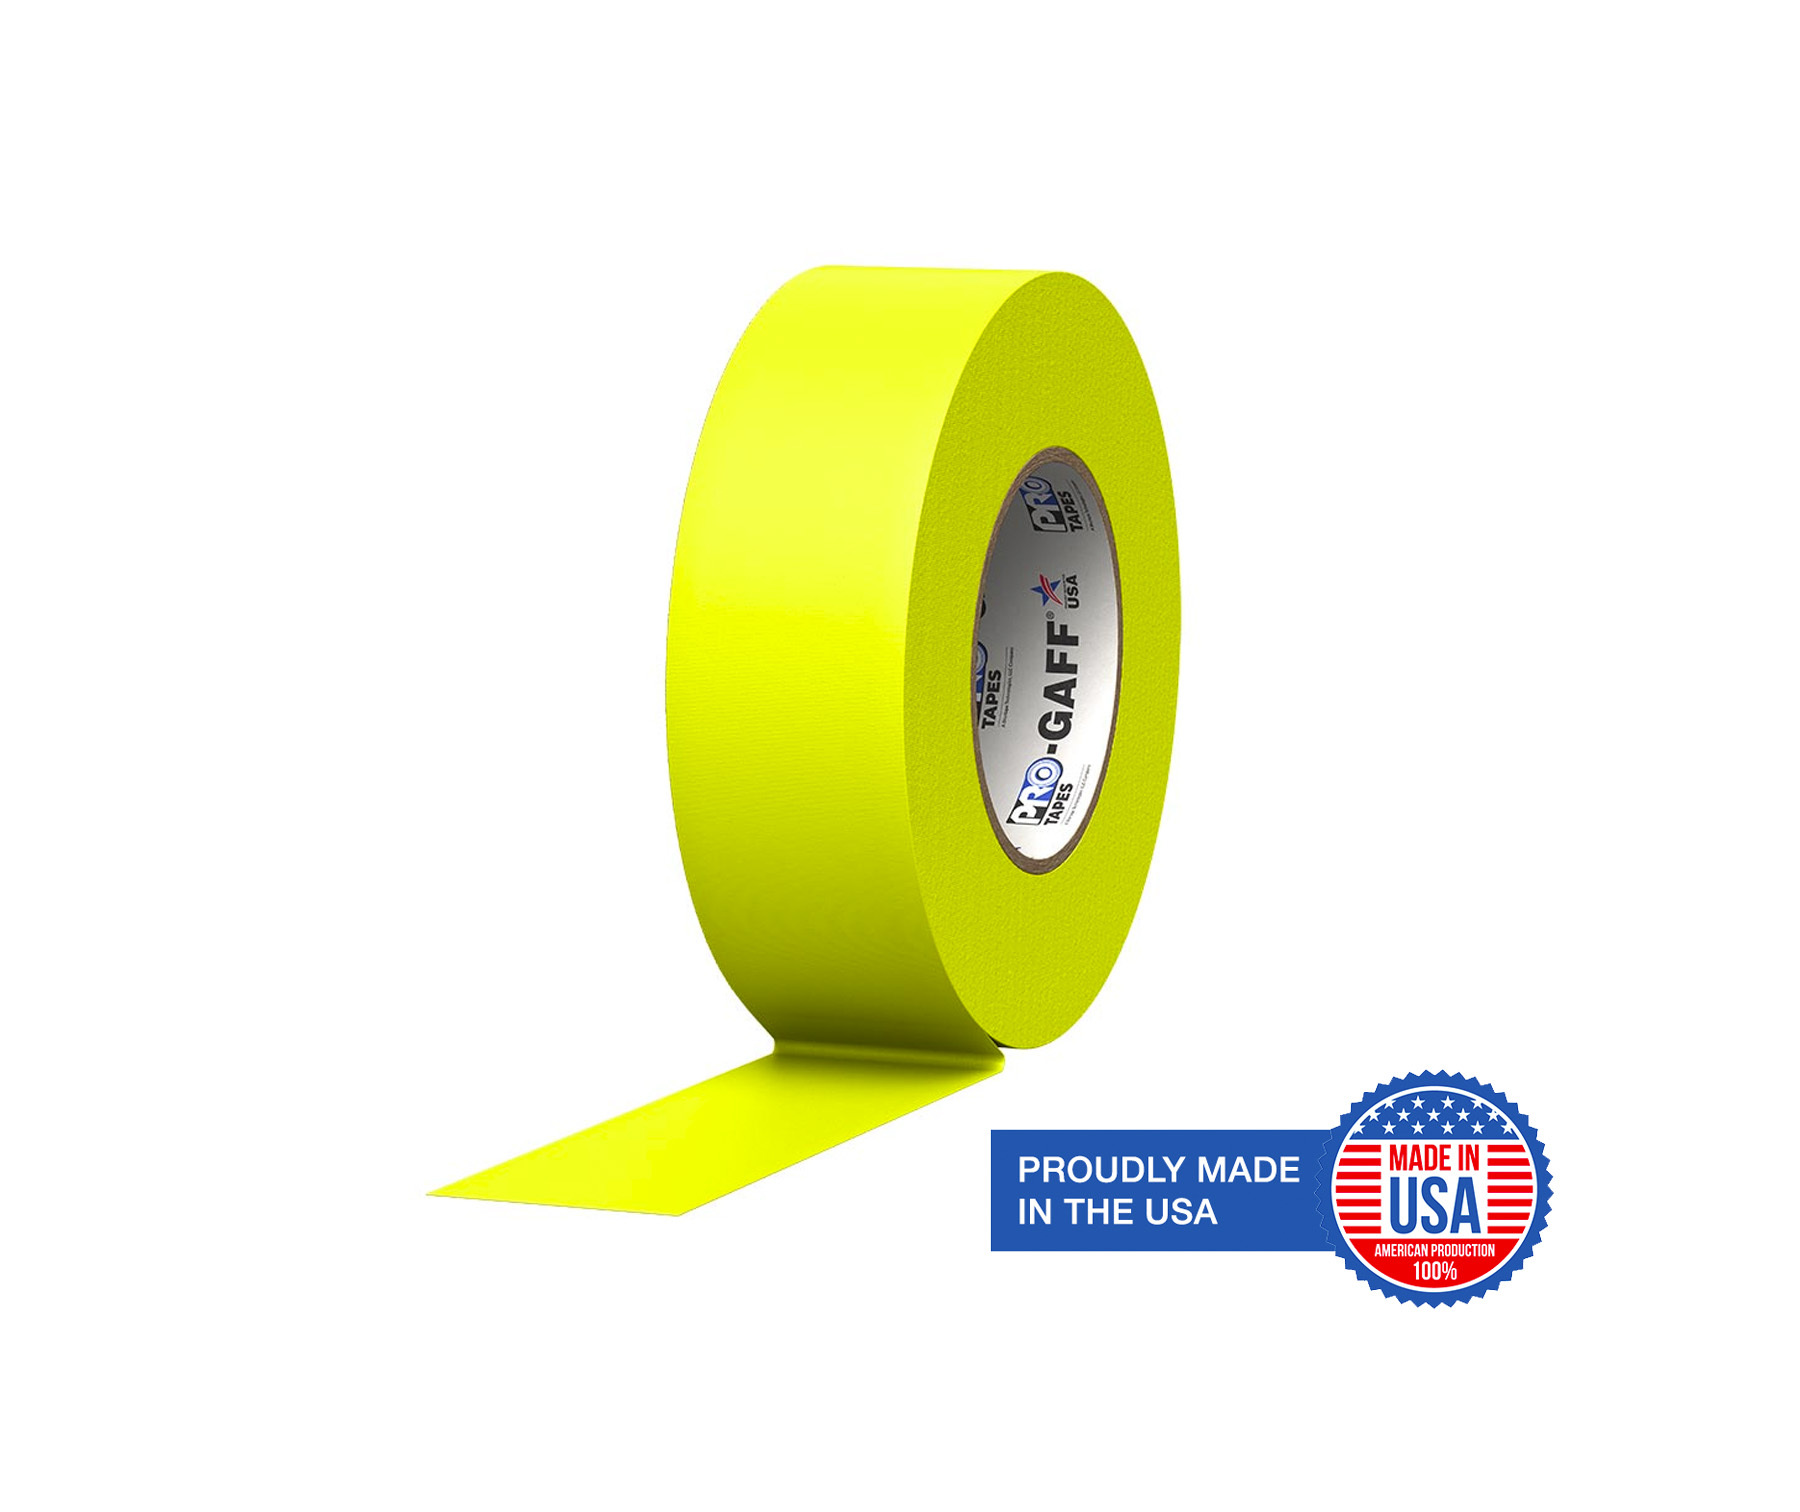 Pro Gaffers Tape Made in USA Chroma Green